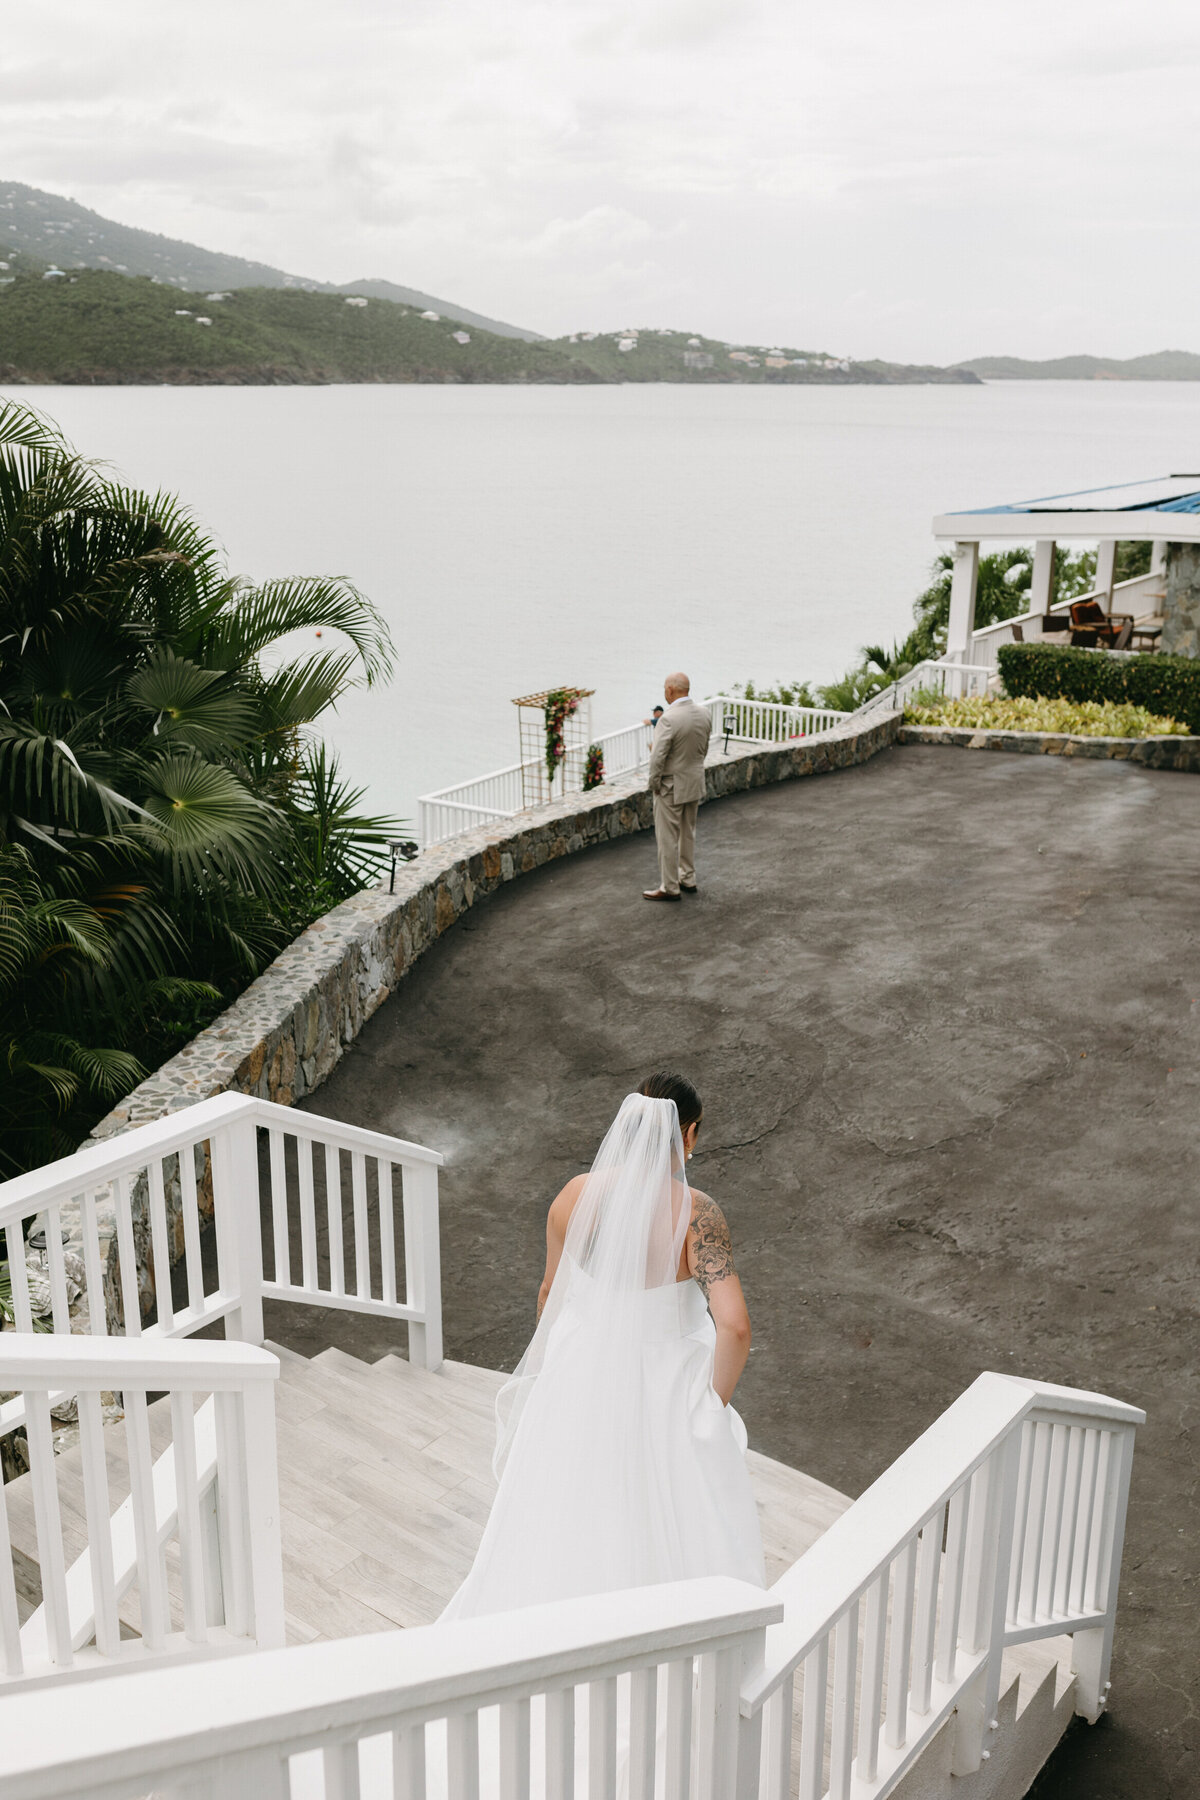 A bride descending outdoor stairs towards a waiting groom against a backdrop of a tropical seaside resort